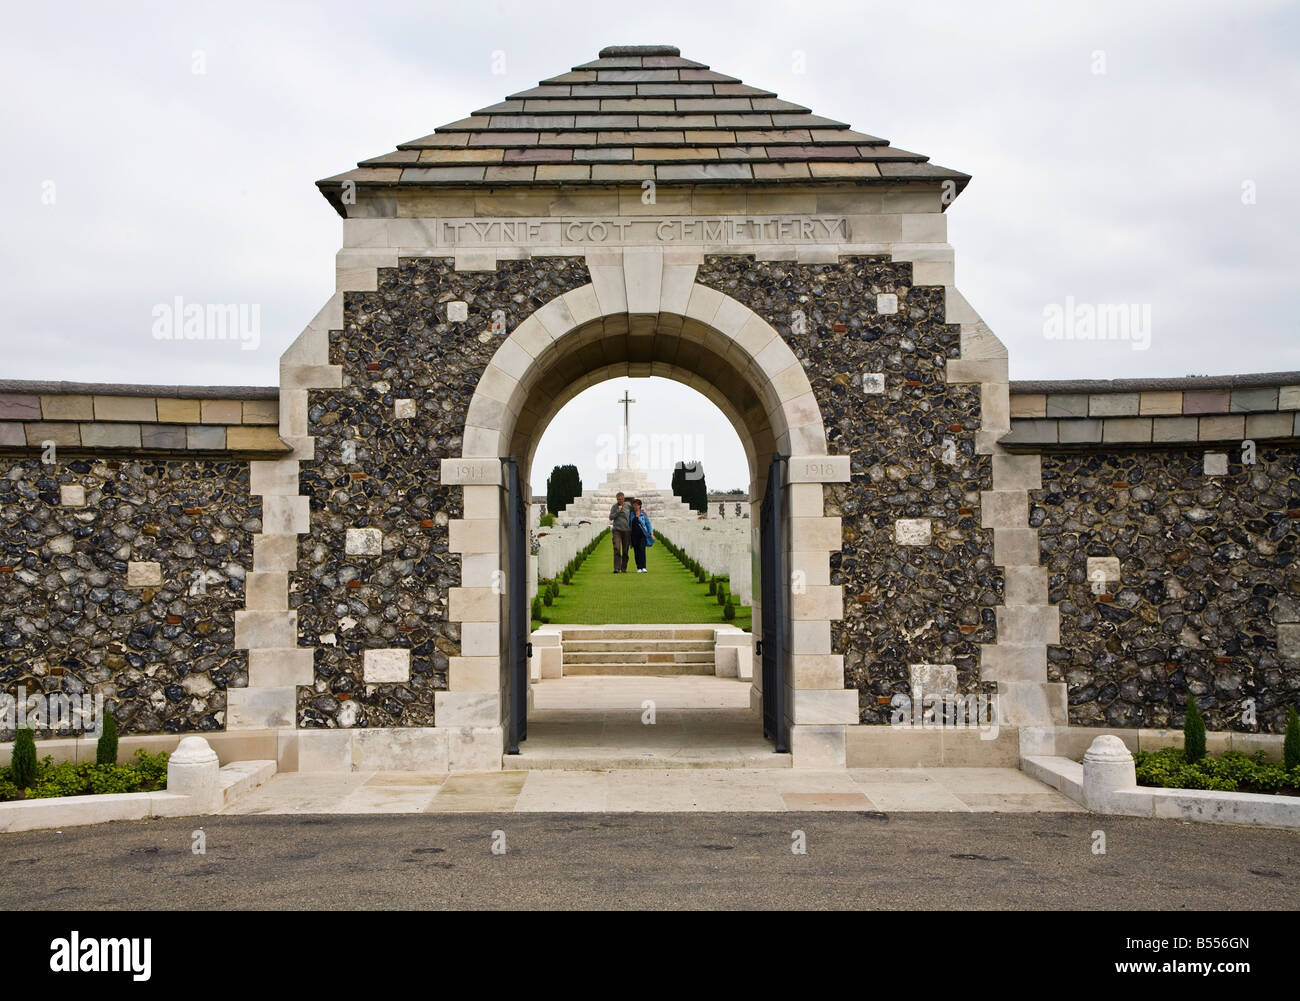 Two people walking between graves at the entrance to Tyne Cot British War Memorial cemetery Belgium Stock Photo